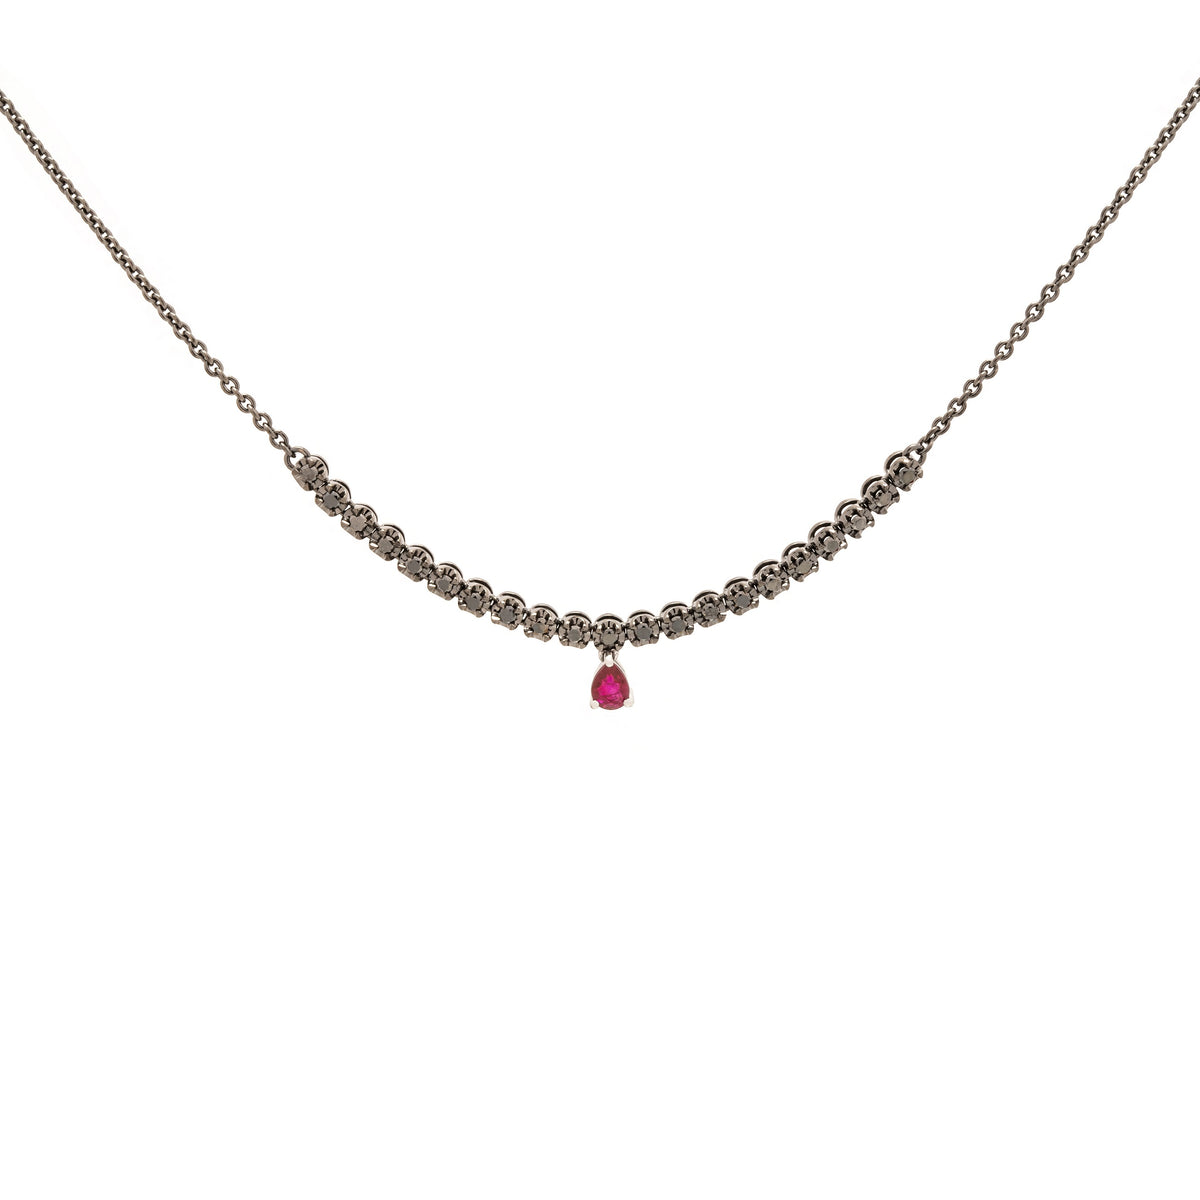 Black Diamond and Ruby necklace.